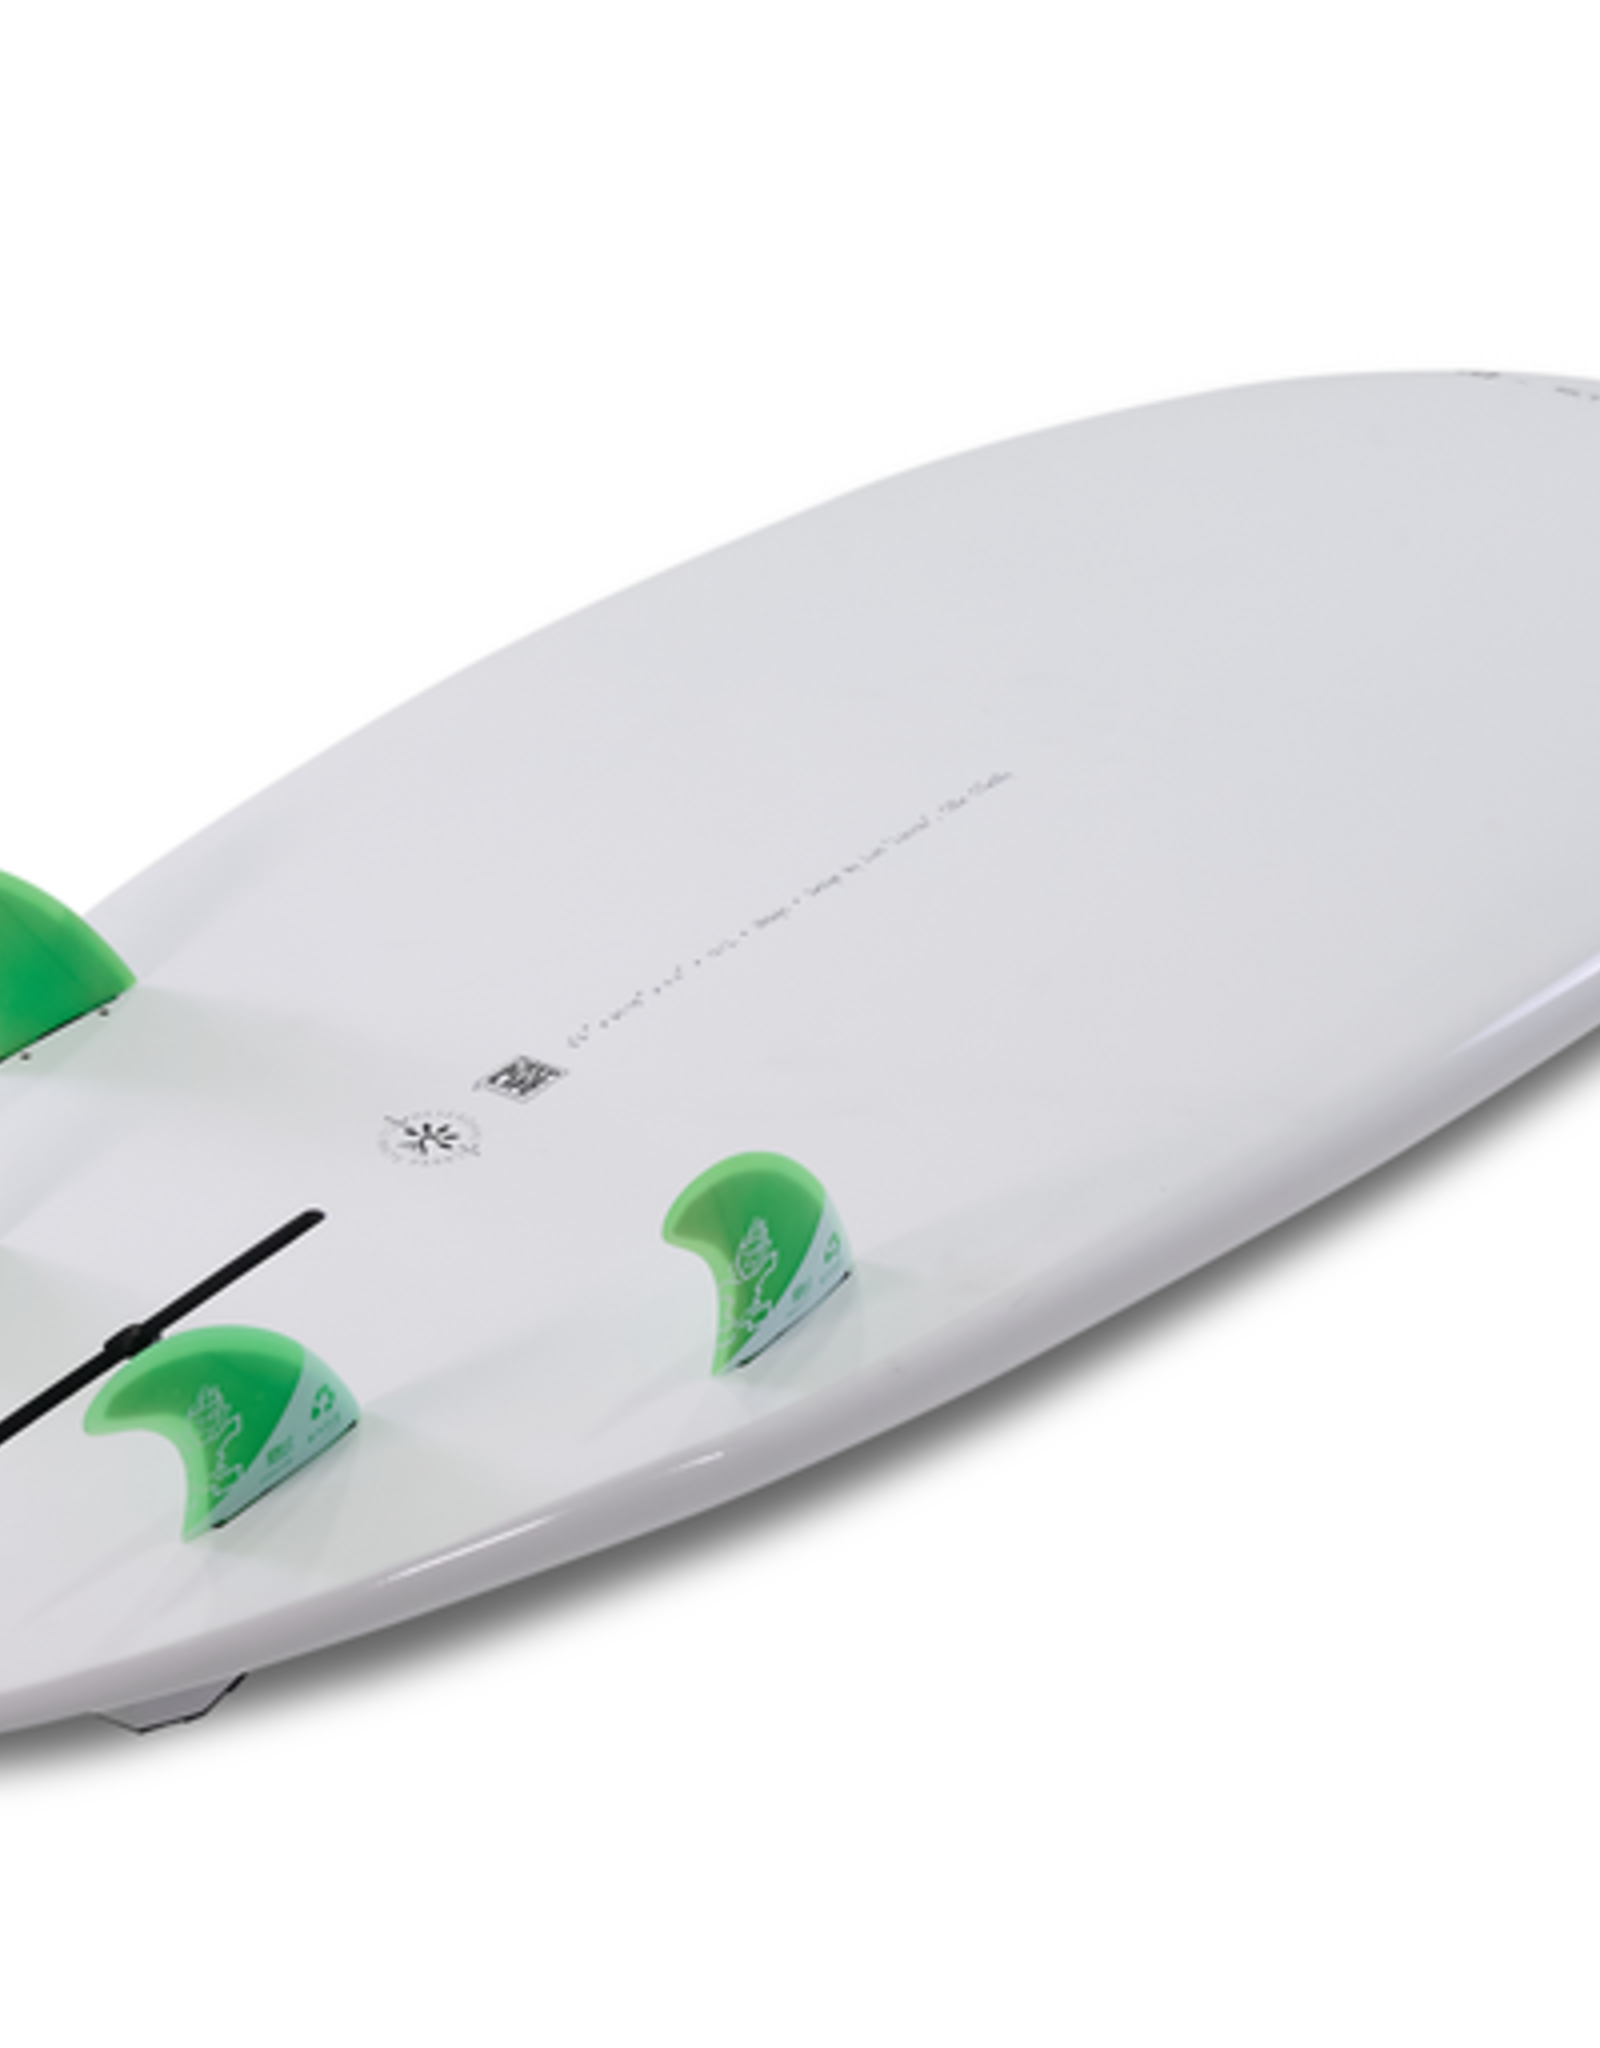 Starboard 2023 STARBOARD SPICE 9'3X32.75 LIMITED SERIES *PRE-ORDER*